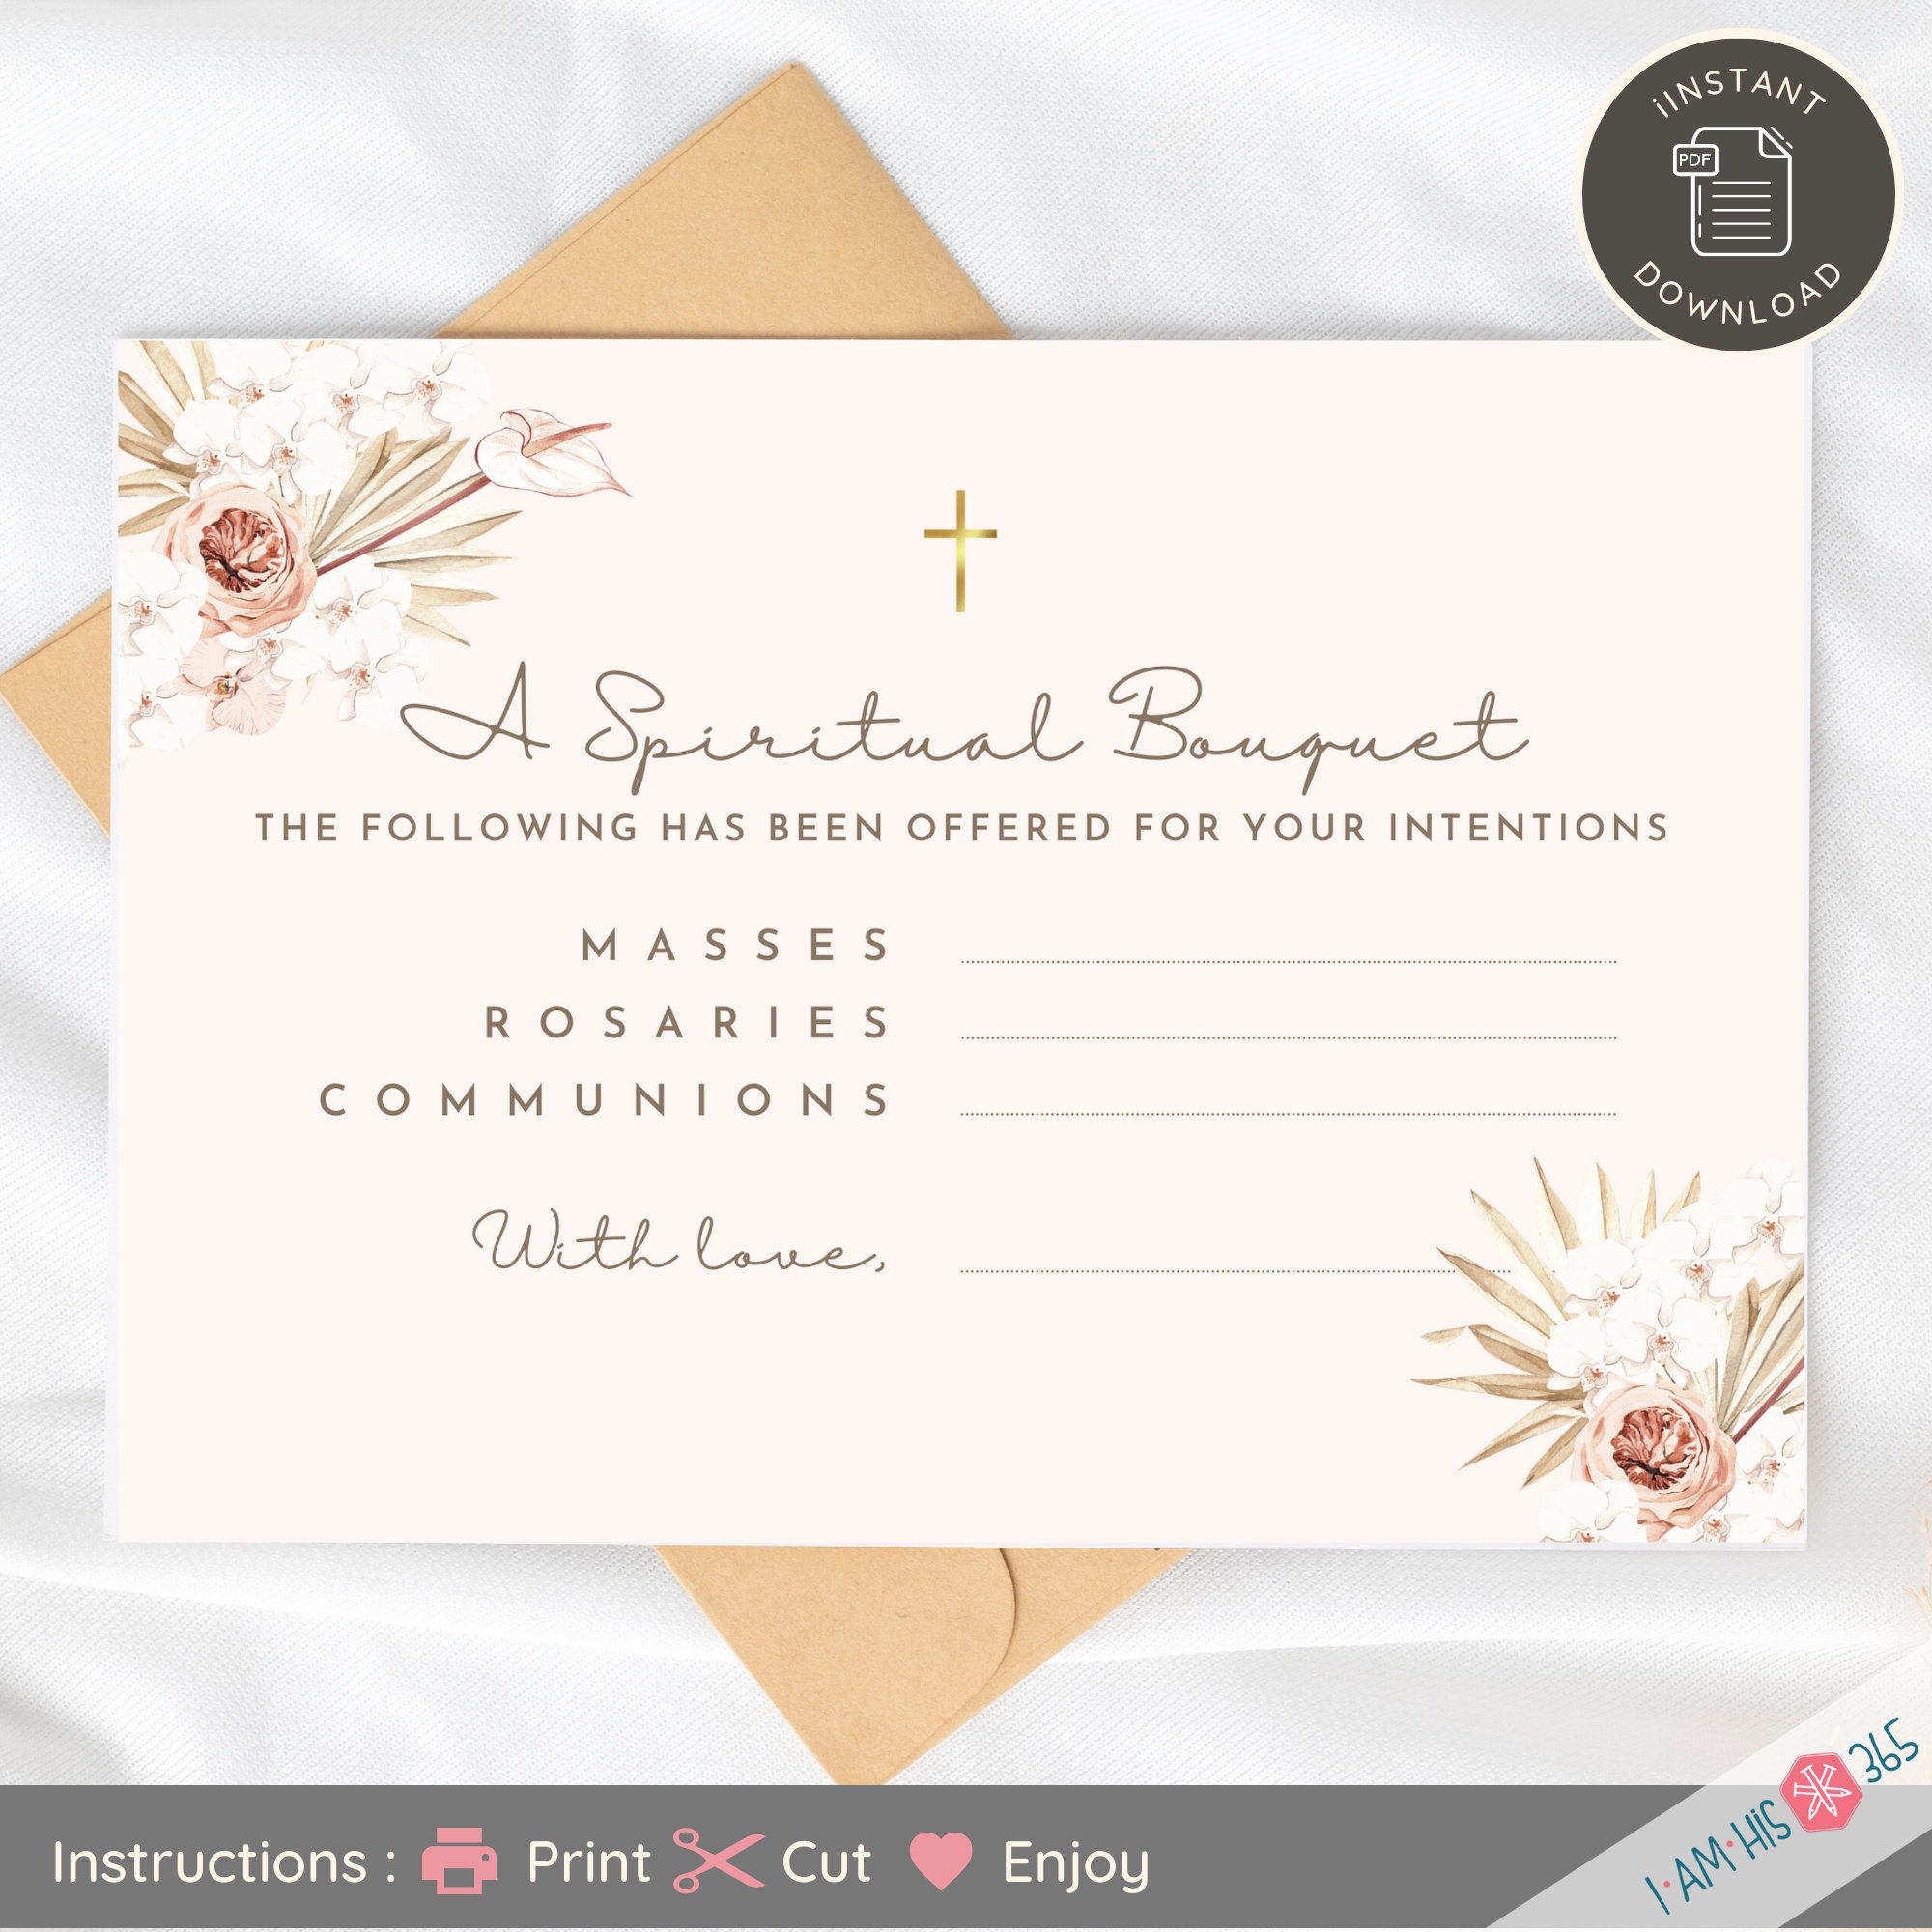 8 Printable Spiritual Bouquet Cards For All Occasions Set Of 8 Catholic Prayer Cards Gift Of Prayer For Priests Birthdays Sacraments